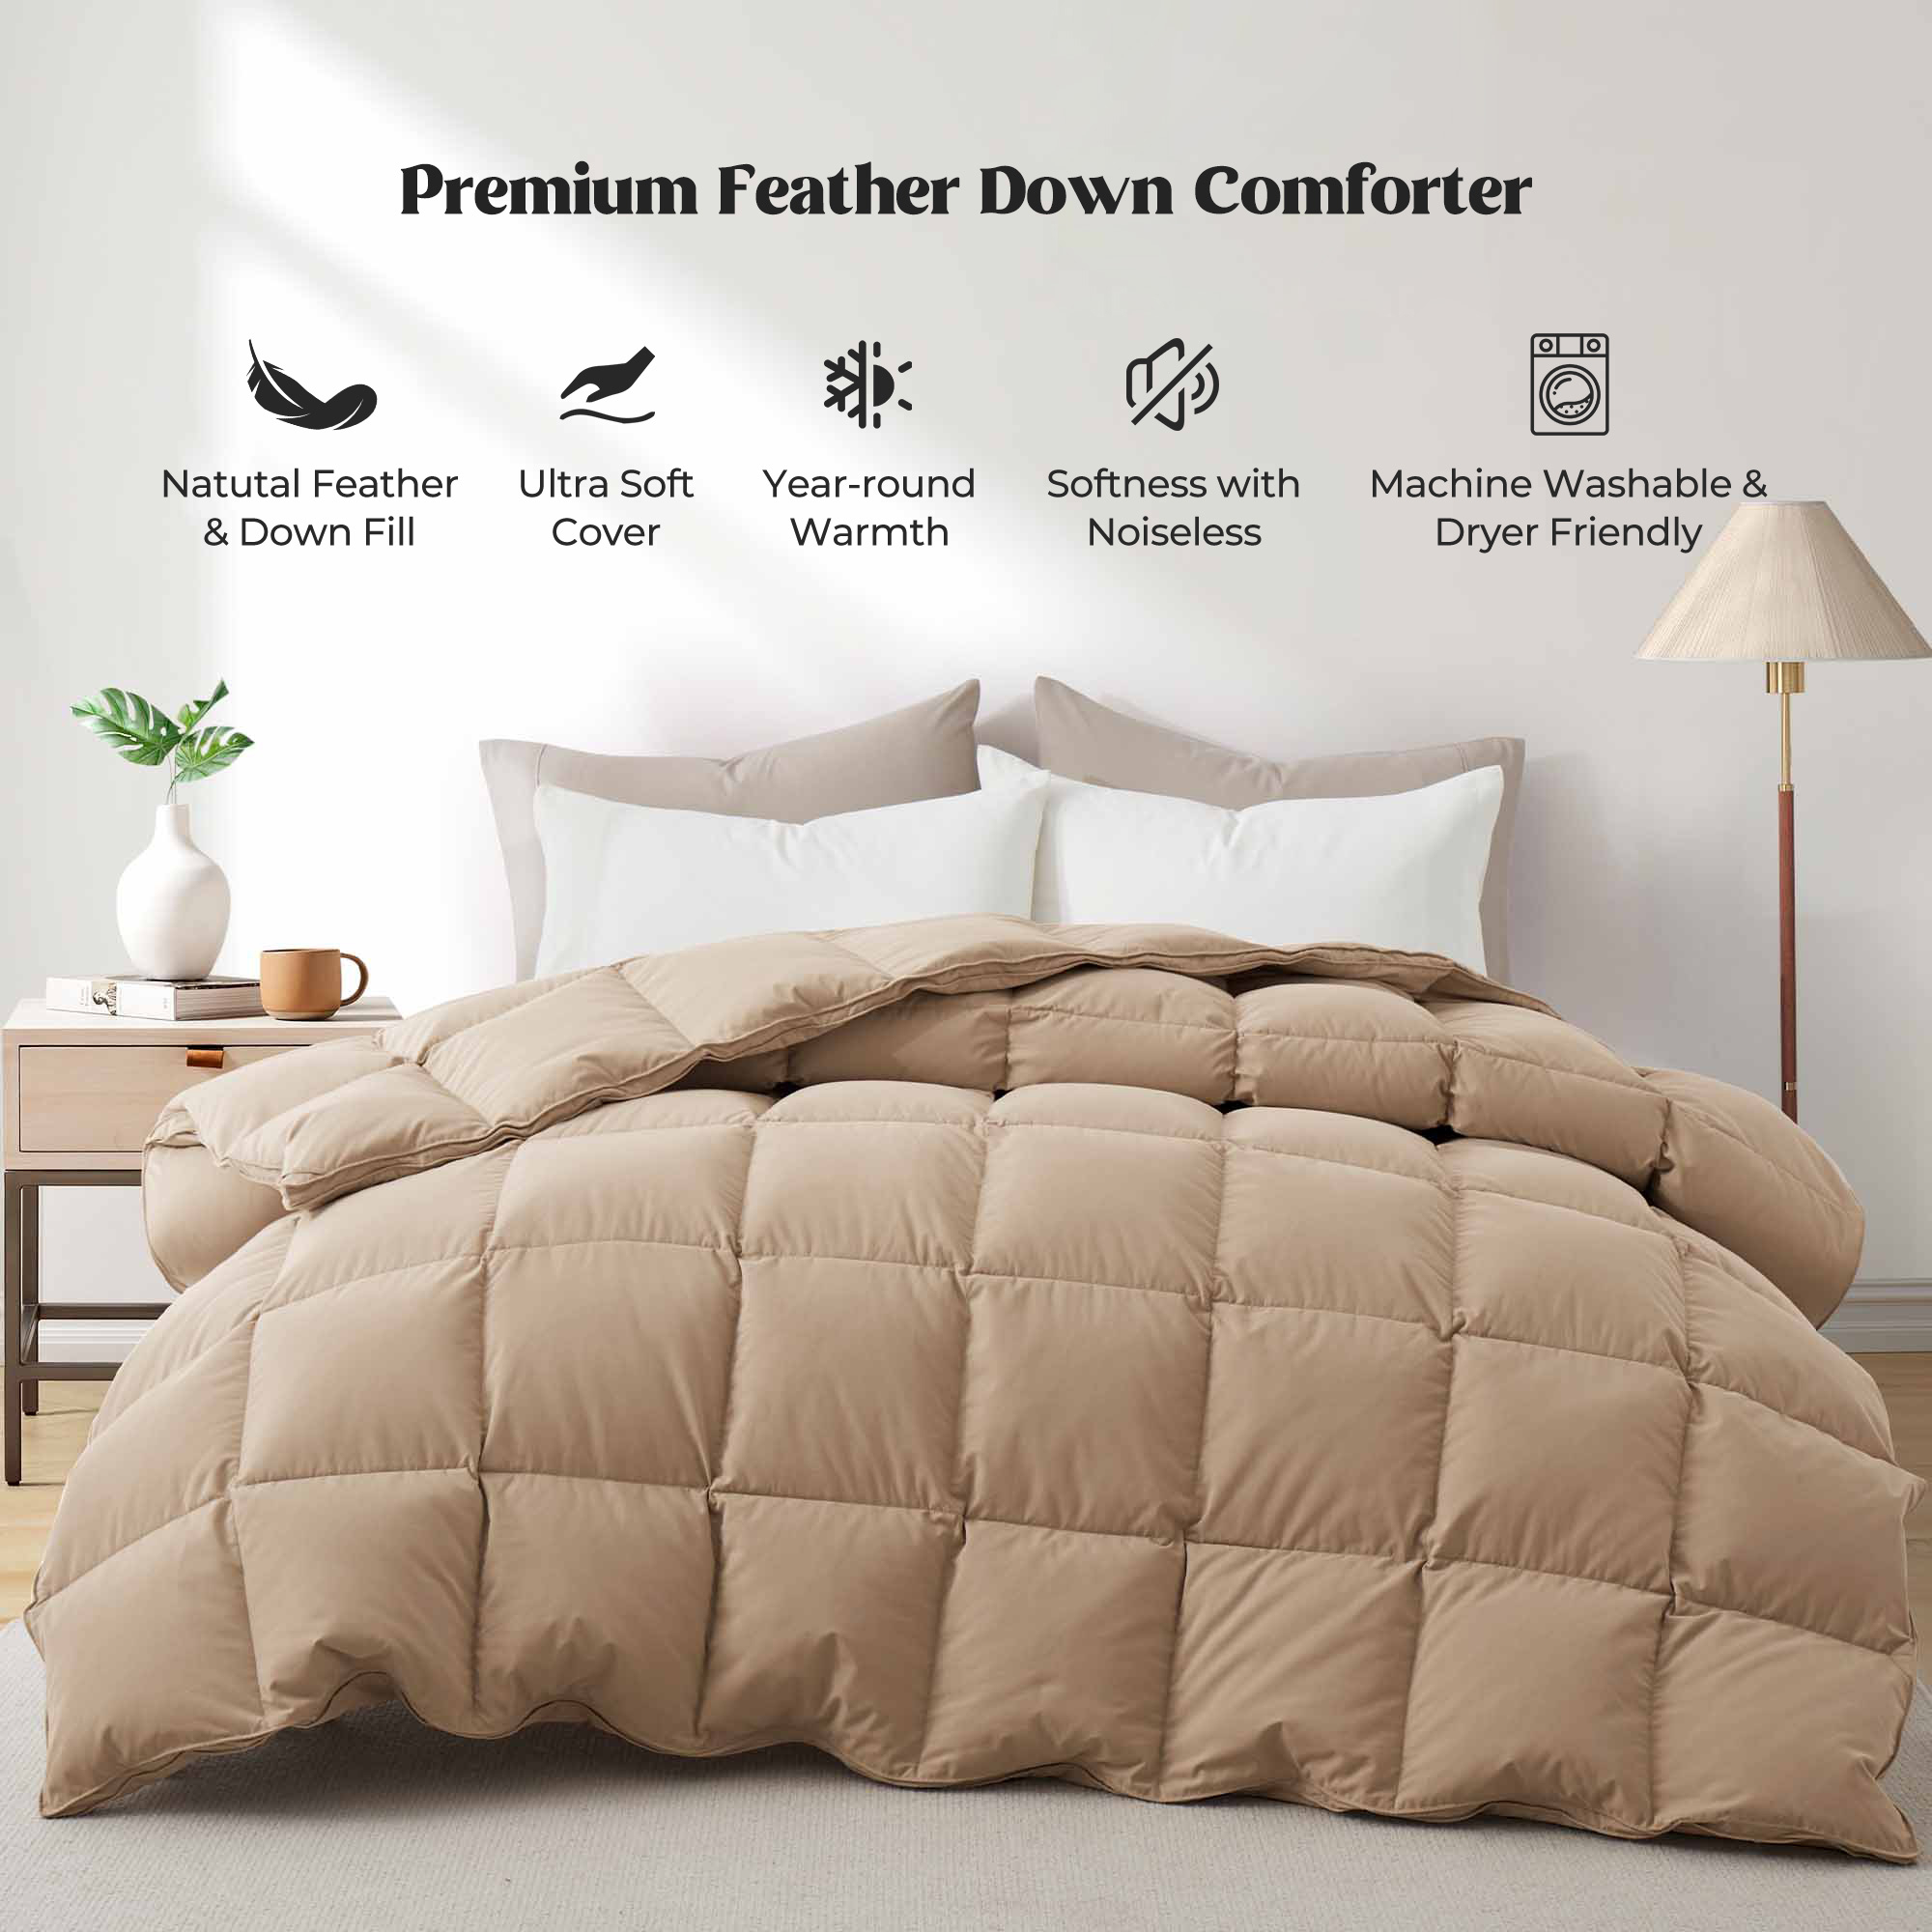 Medium Weight Goose Feather And Down Comforter - Ginger Root, Full/Queen